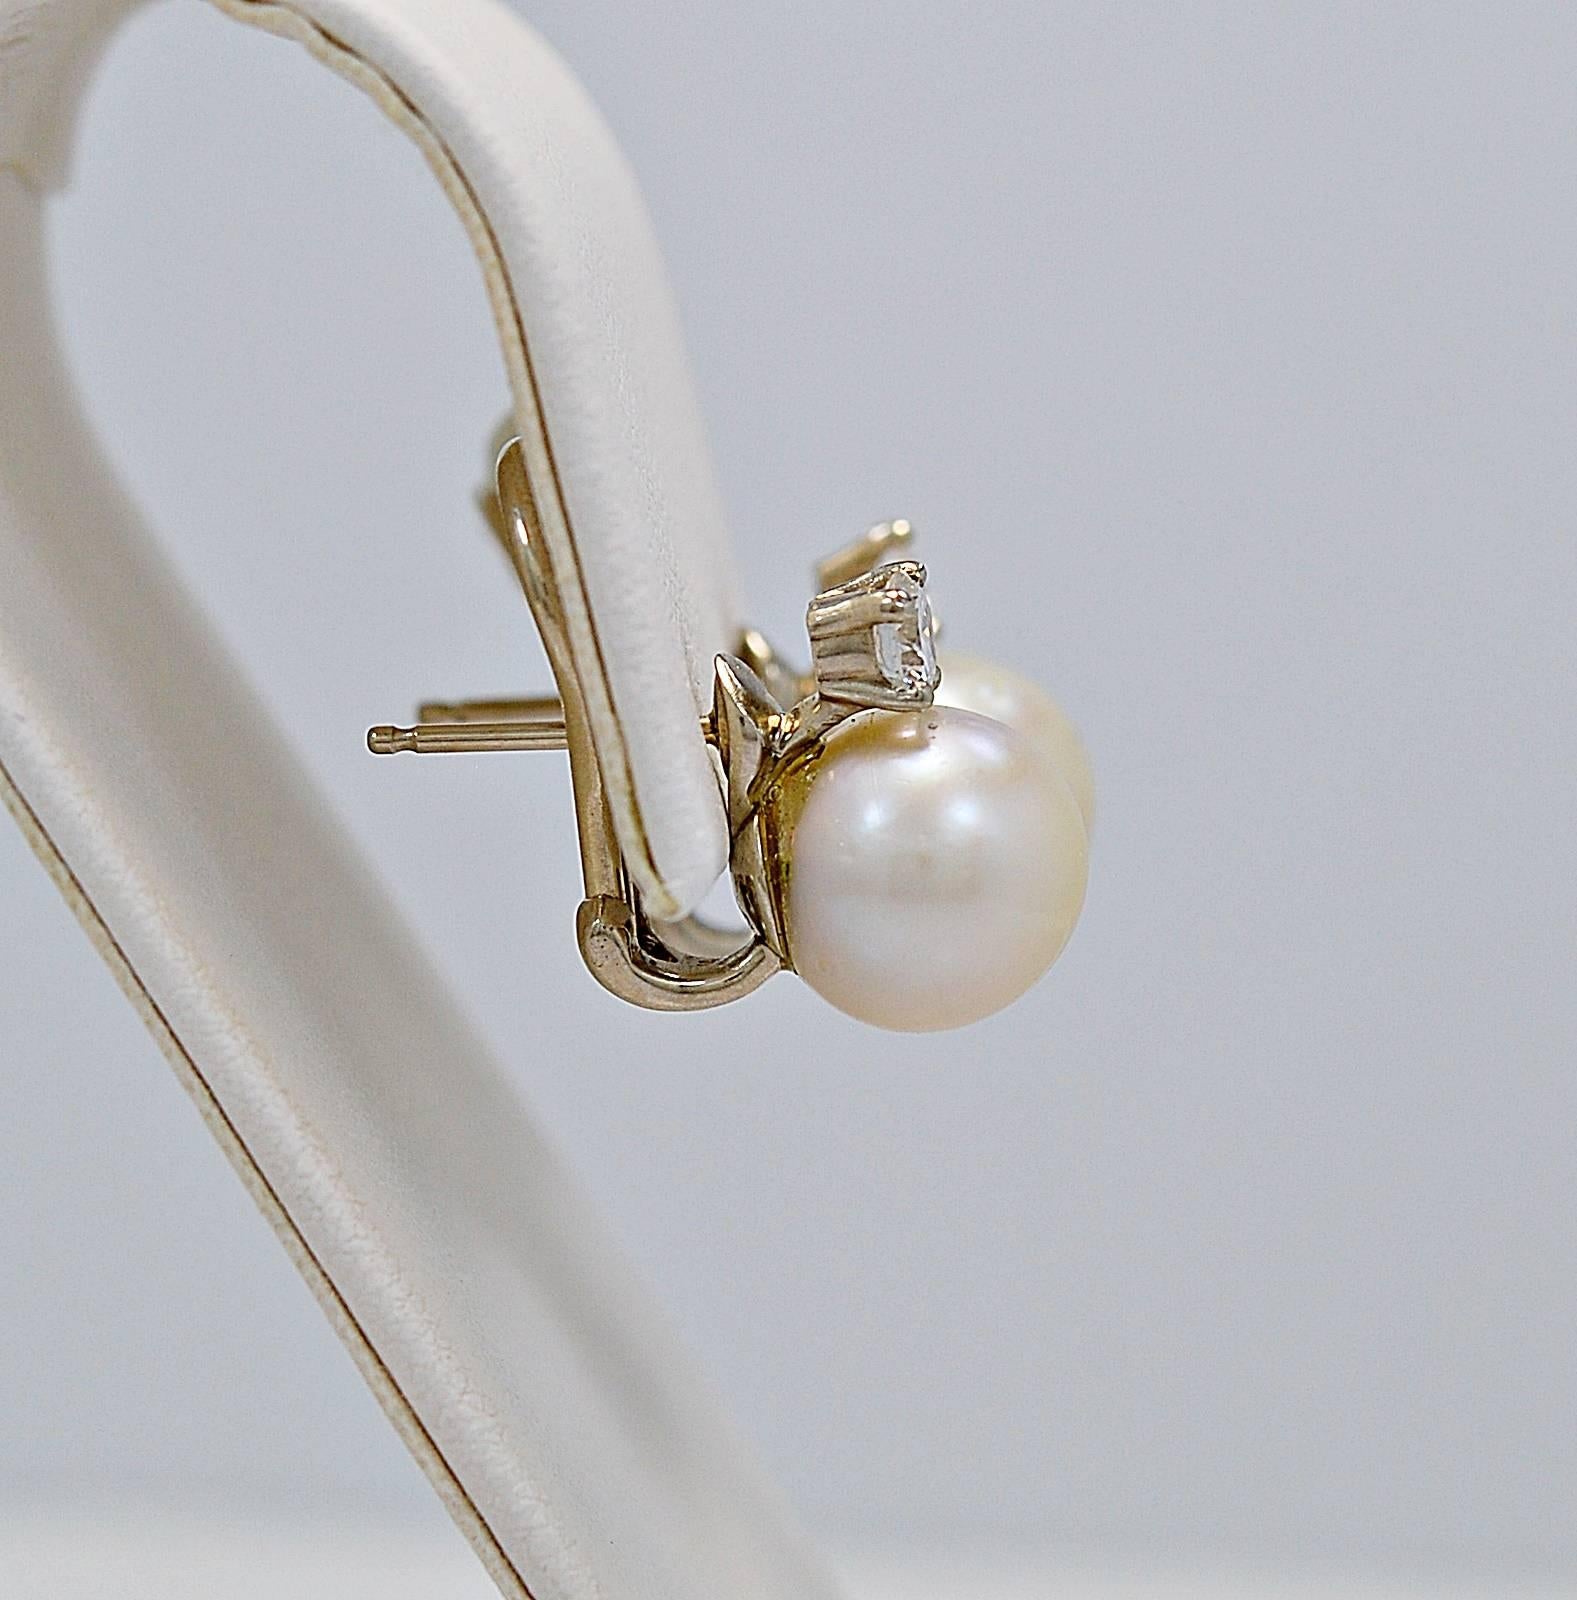 A gorgeous pair of estate earrings with omega backs and crafted in 18K yellow gold. The pearls are 10-10.2 mm and are accented with .66ct. apx. T.W. of round brilliant diamonds with SI1 clarity and G-H color. A classic and traditional look for